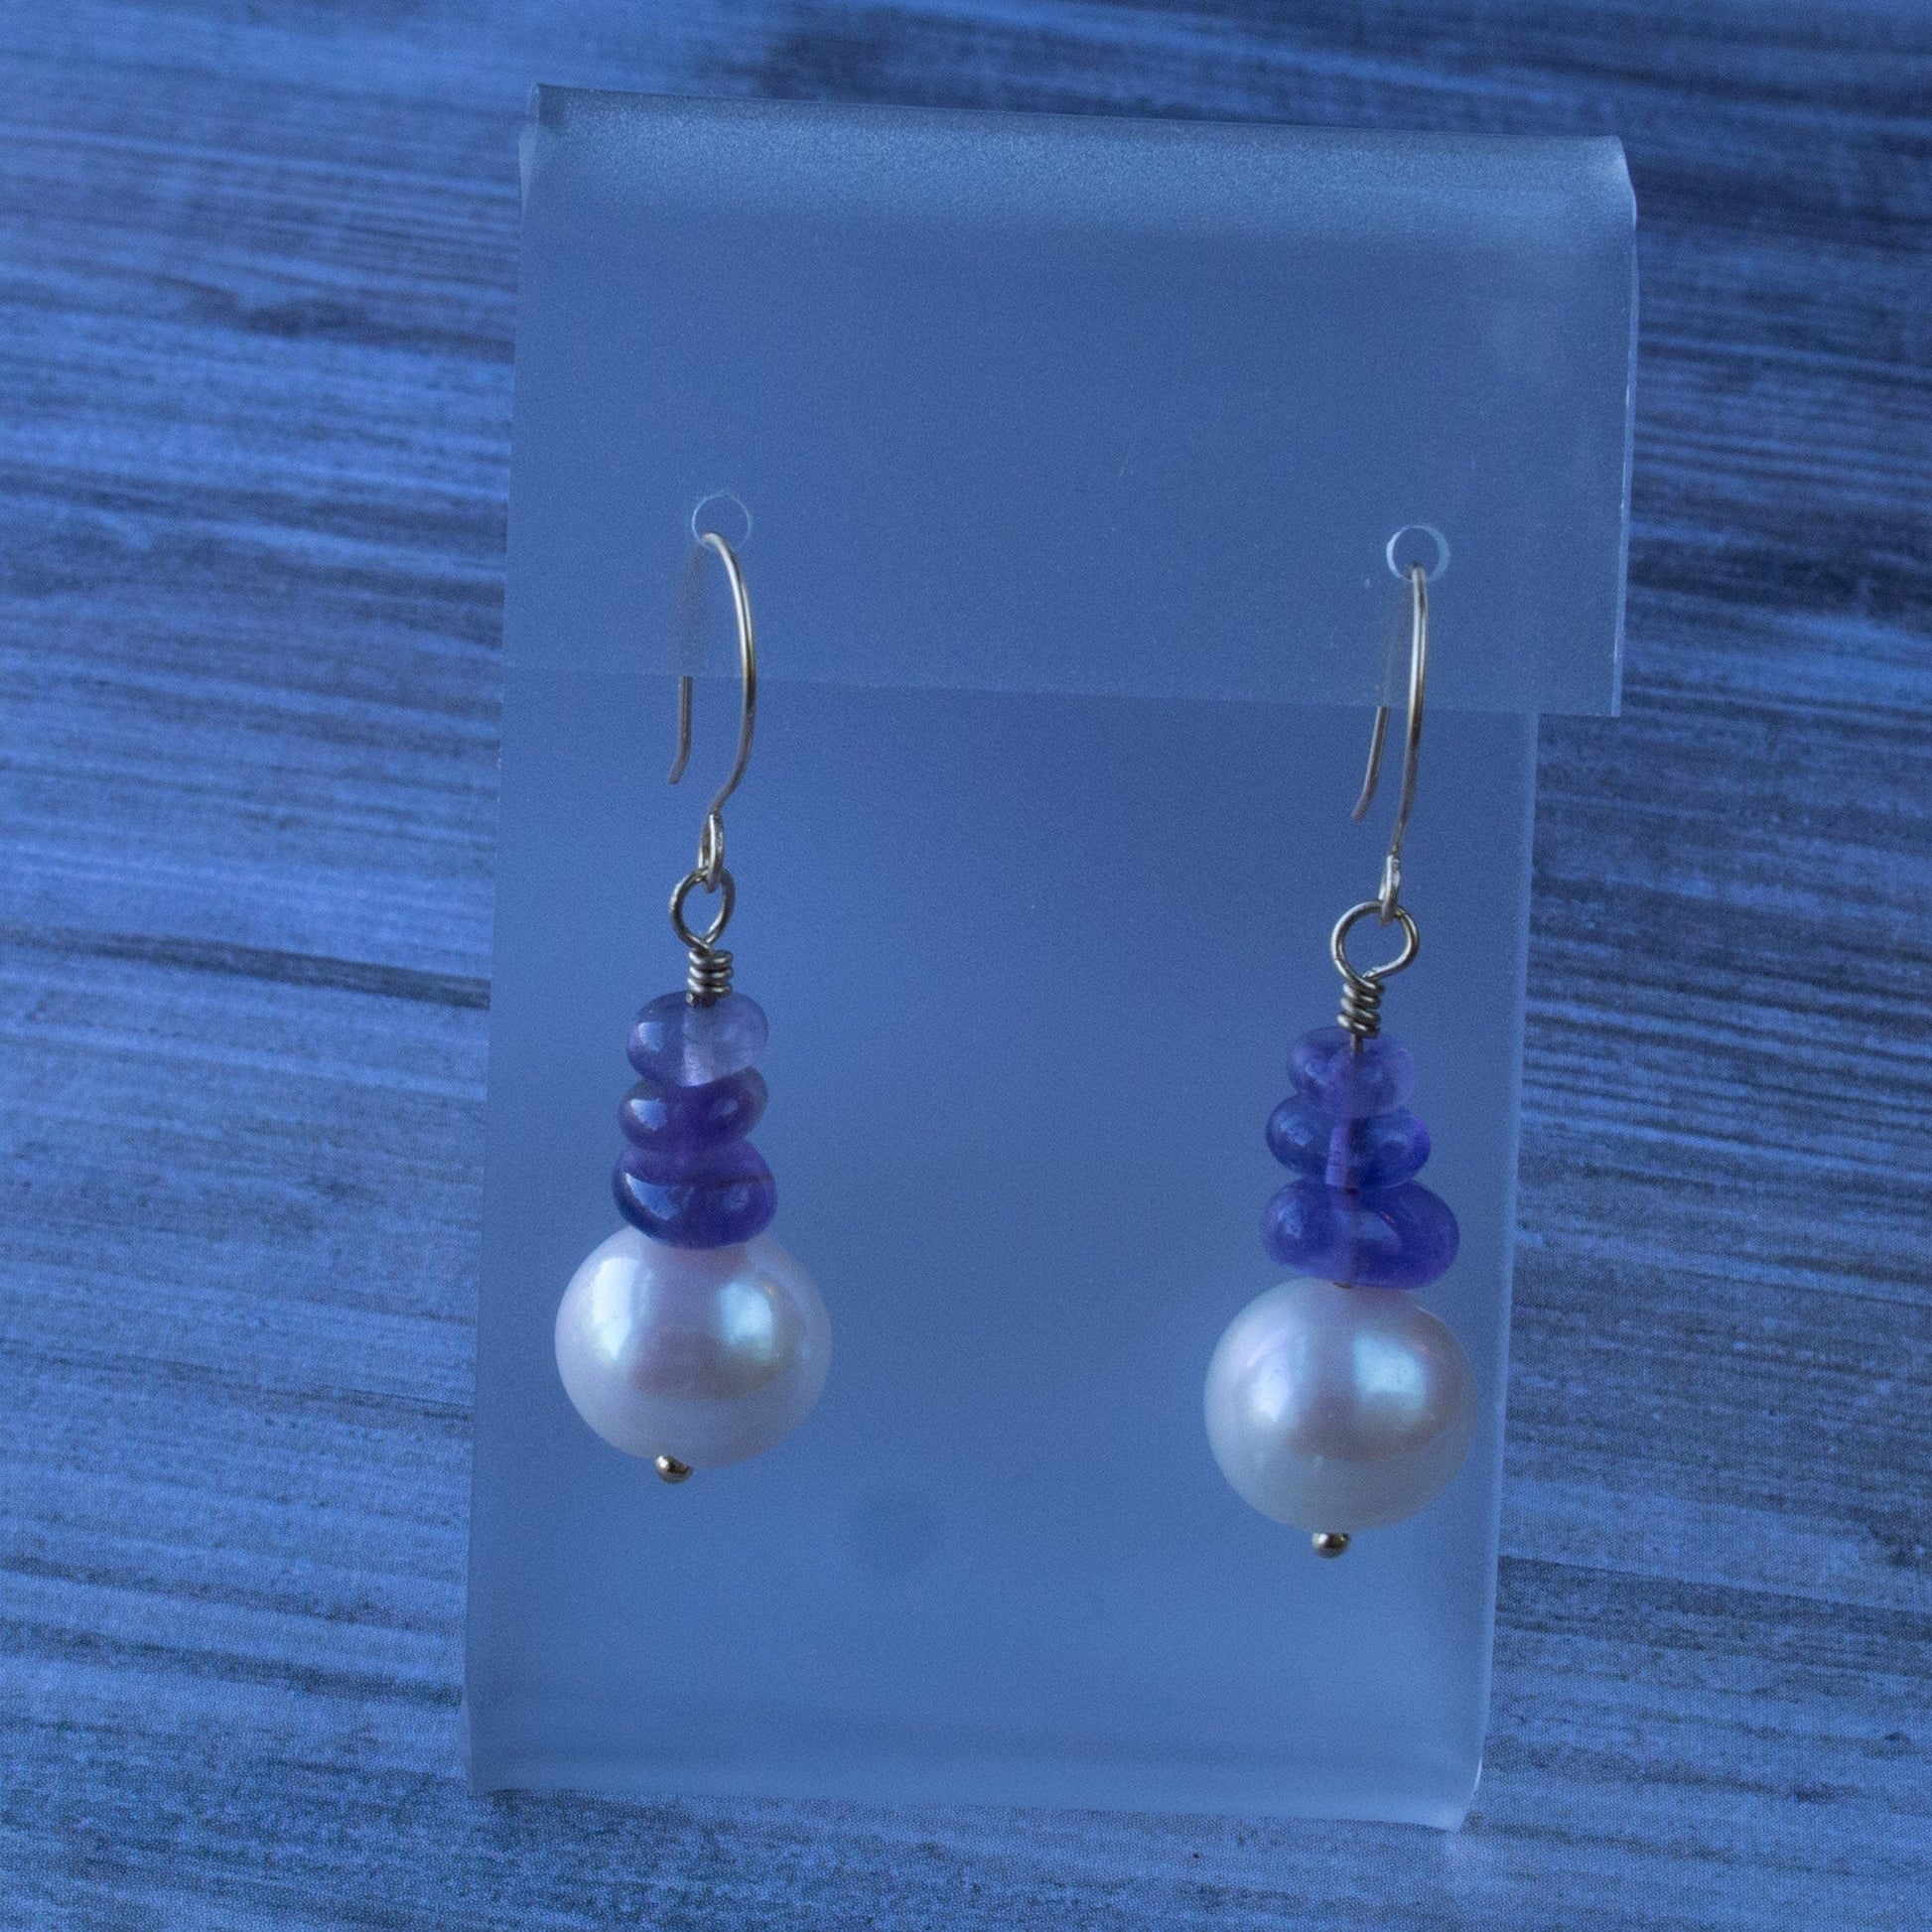 Arbor Trading Post Earrings Handcrafted Freshwater White Pearl Natural Amethyst 14K Gold Drop Earrings